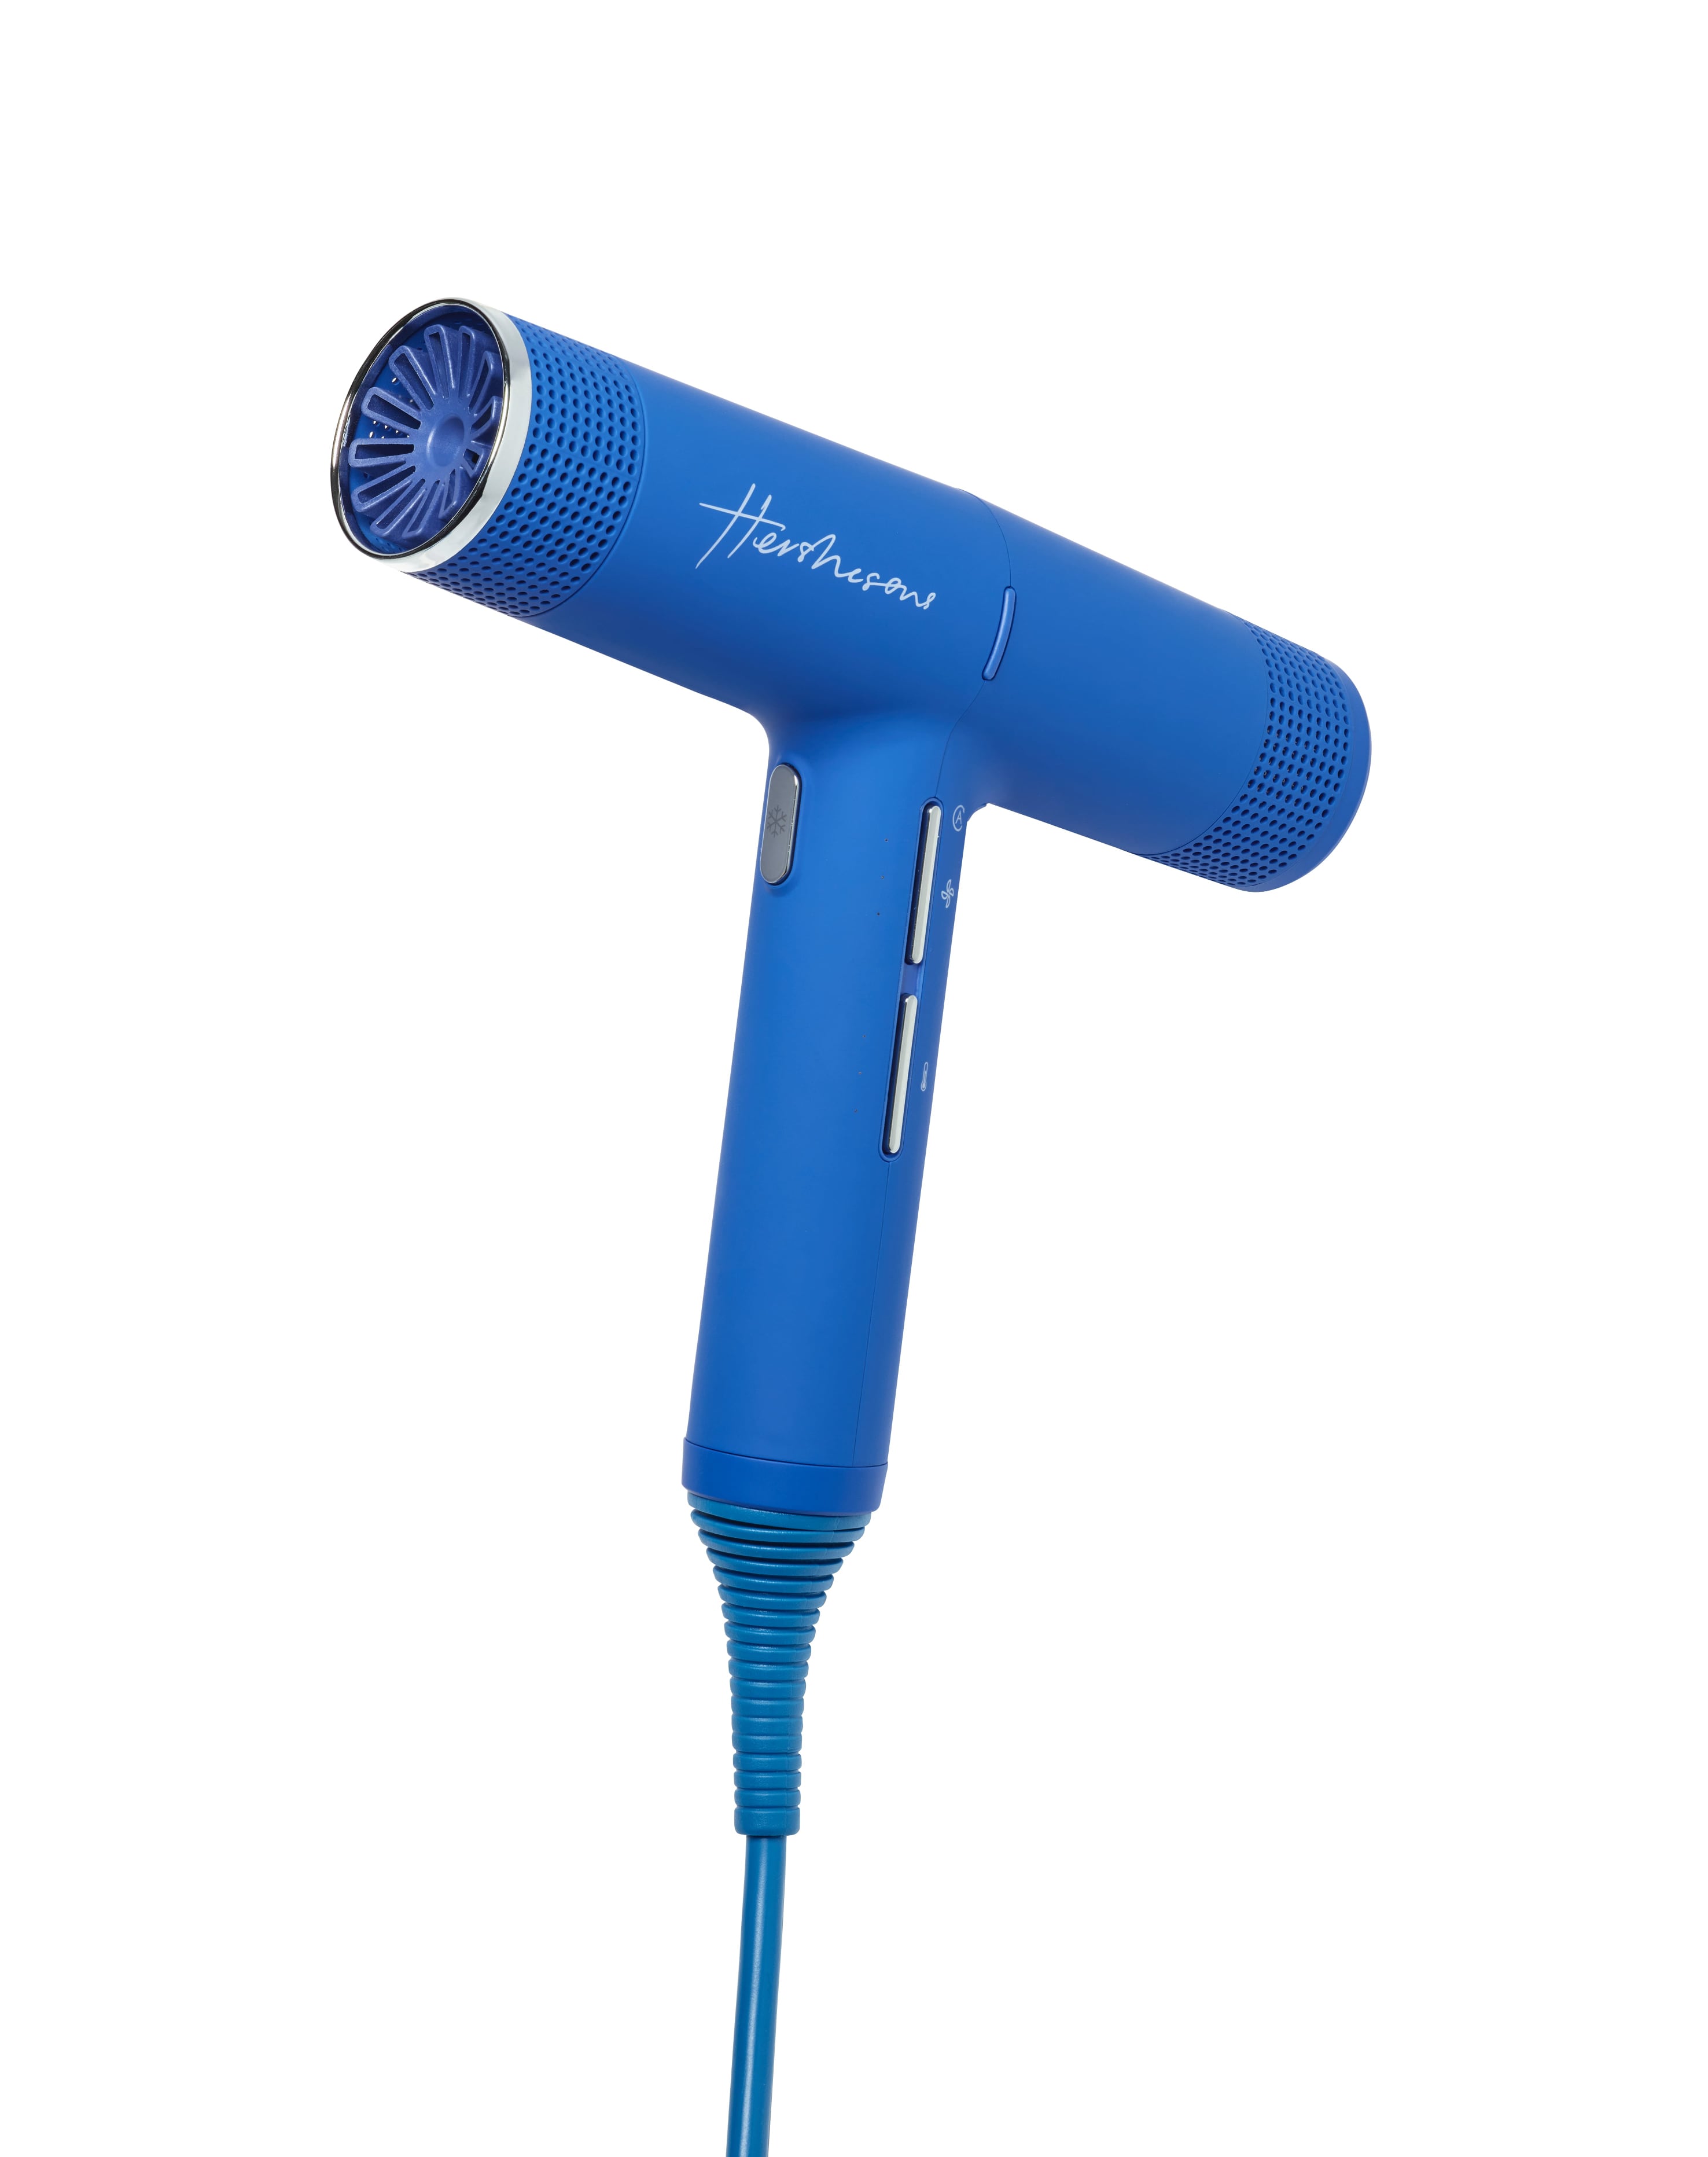 Hershesons Great Hairdryer | Our No. 1 lightest and fastest.